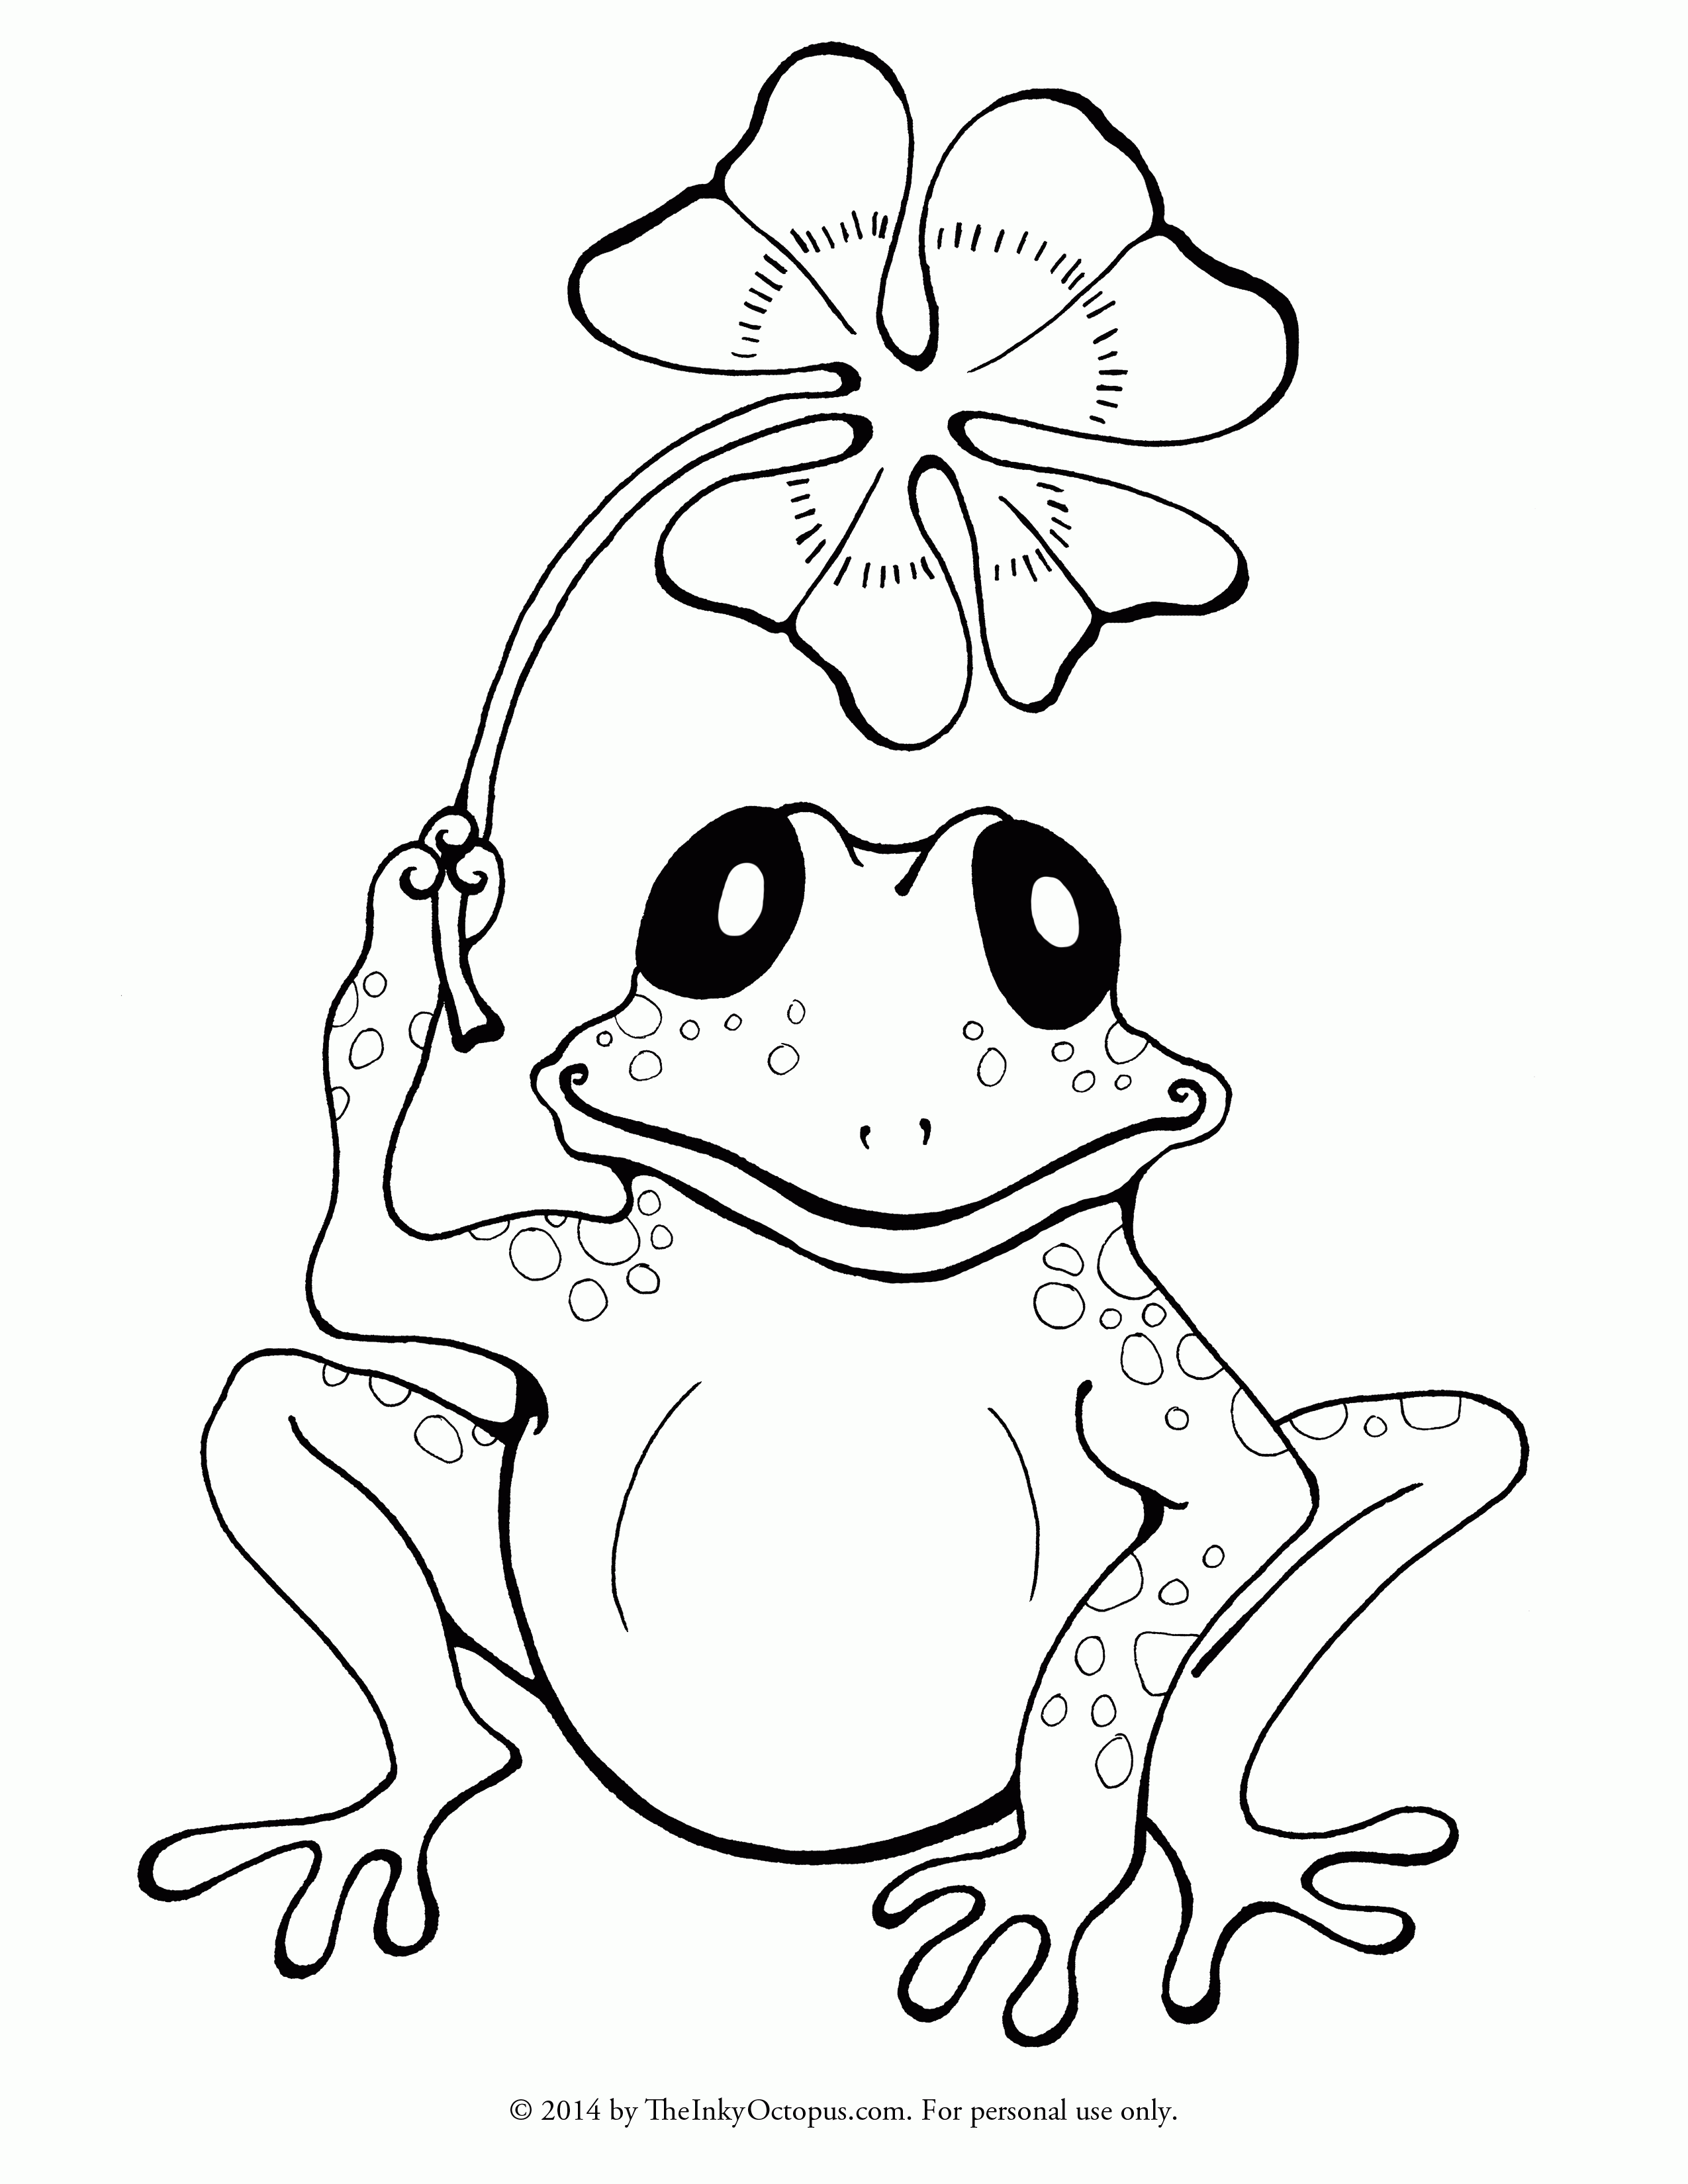 Printable Frog & Clover Coloring Page - The Inky Octopus